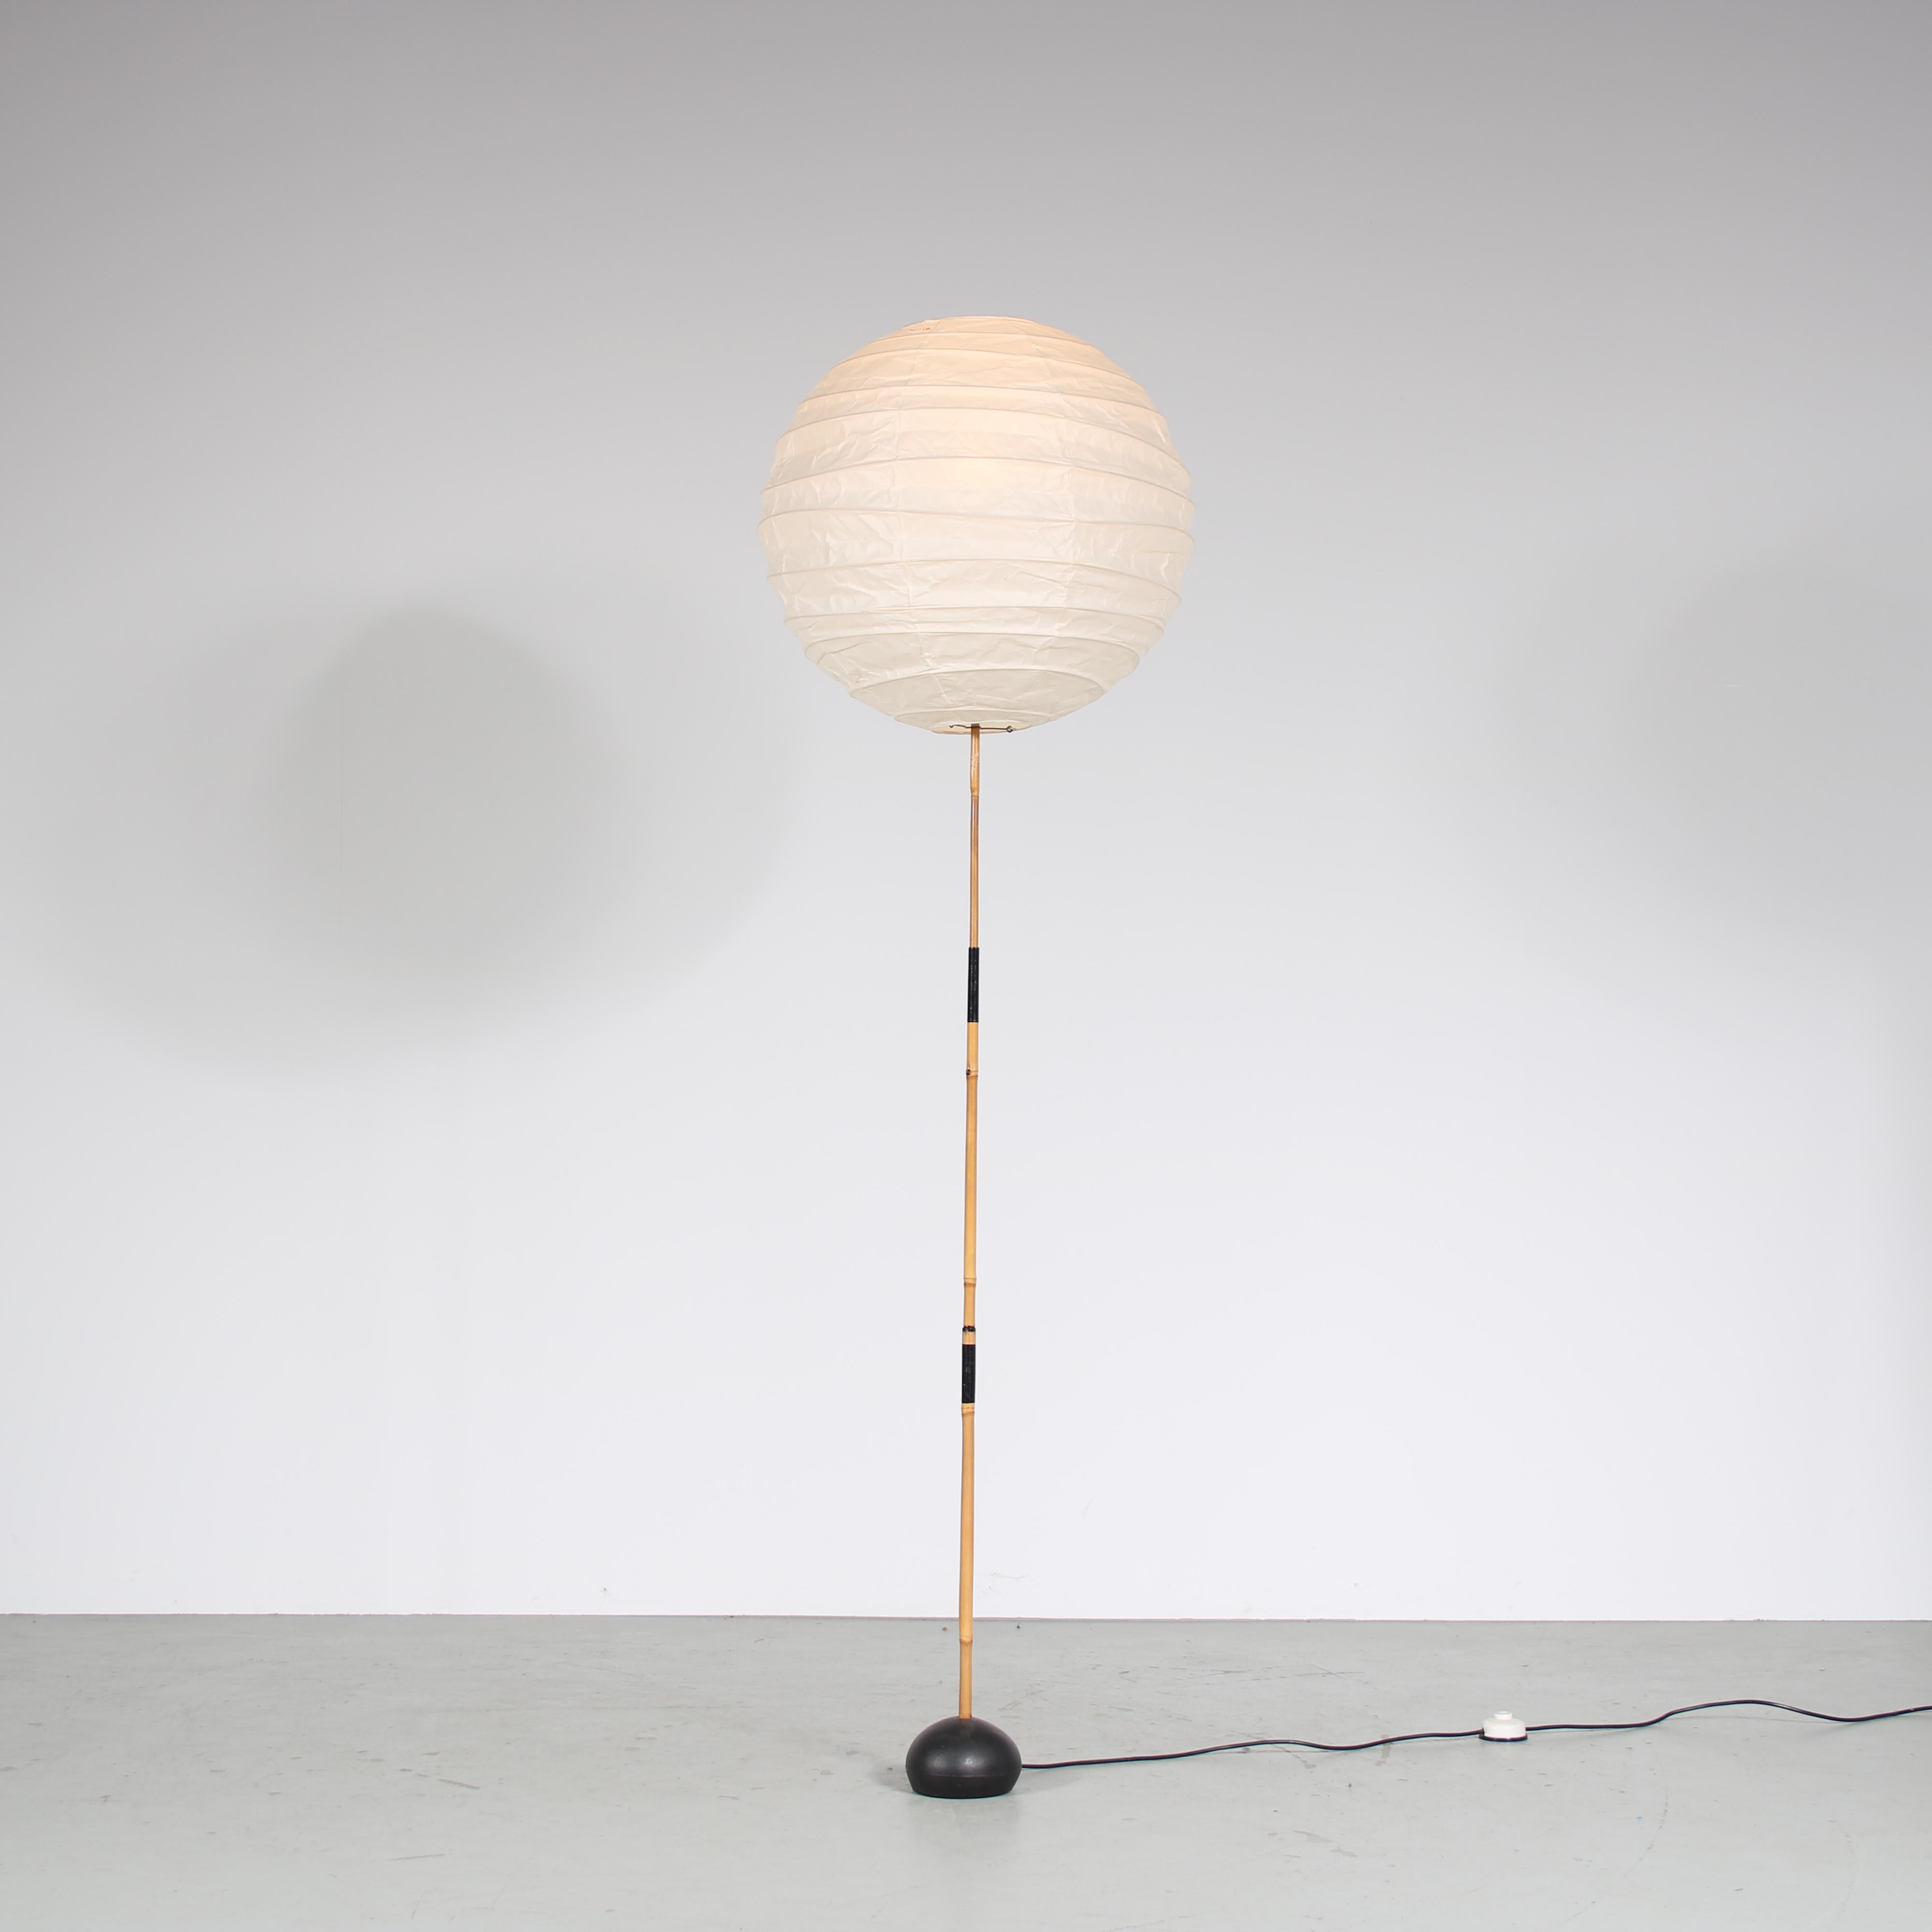 A fantastic “Akari” Floor Lamp designed by Isamu Noguchi and manufactured by Ozeki & Co. in Japan, around 1950.

This exquisite floor lamp showcases the timeless elegance of Isamu Noguchi’s design philosophy. The lamp features a cast iron base